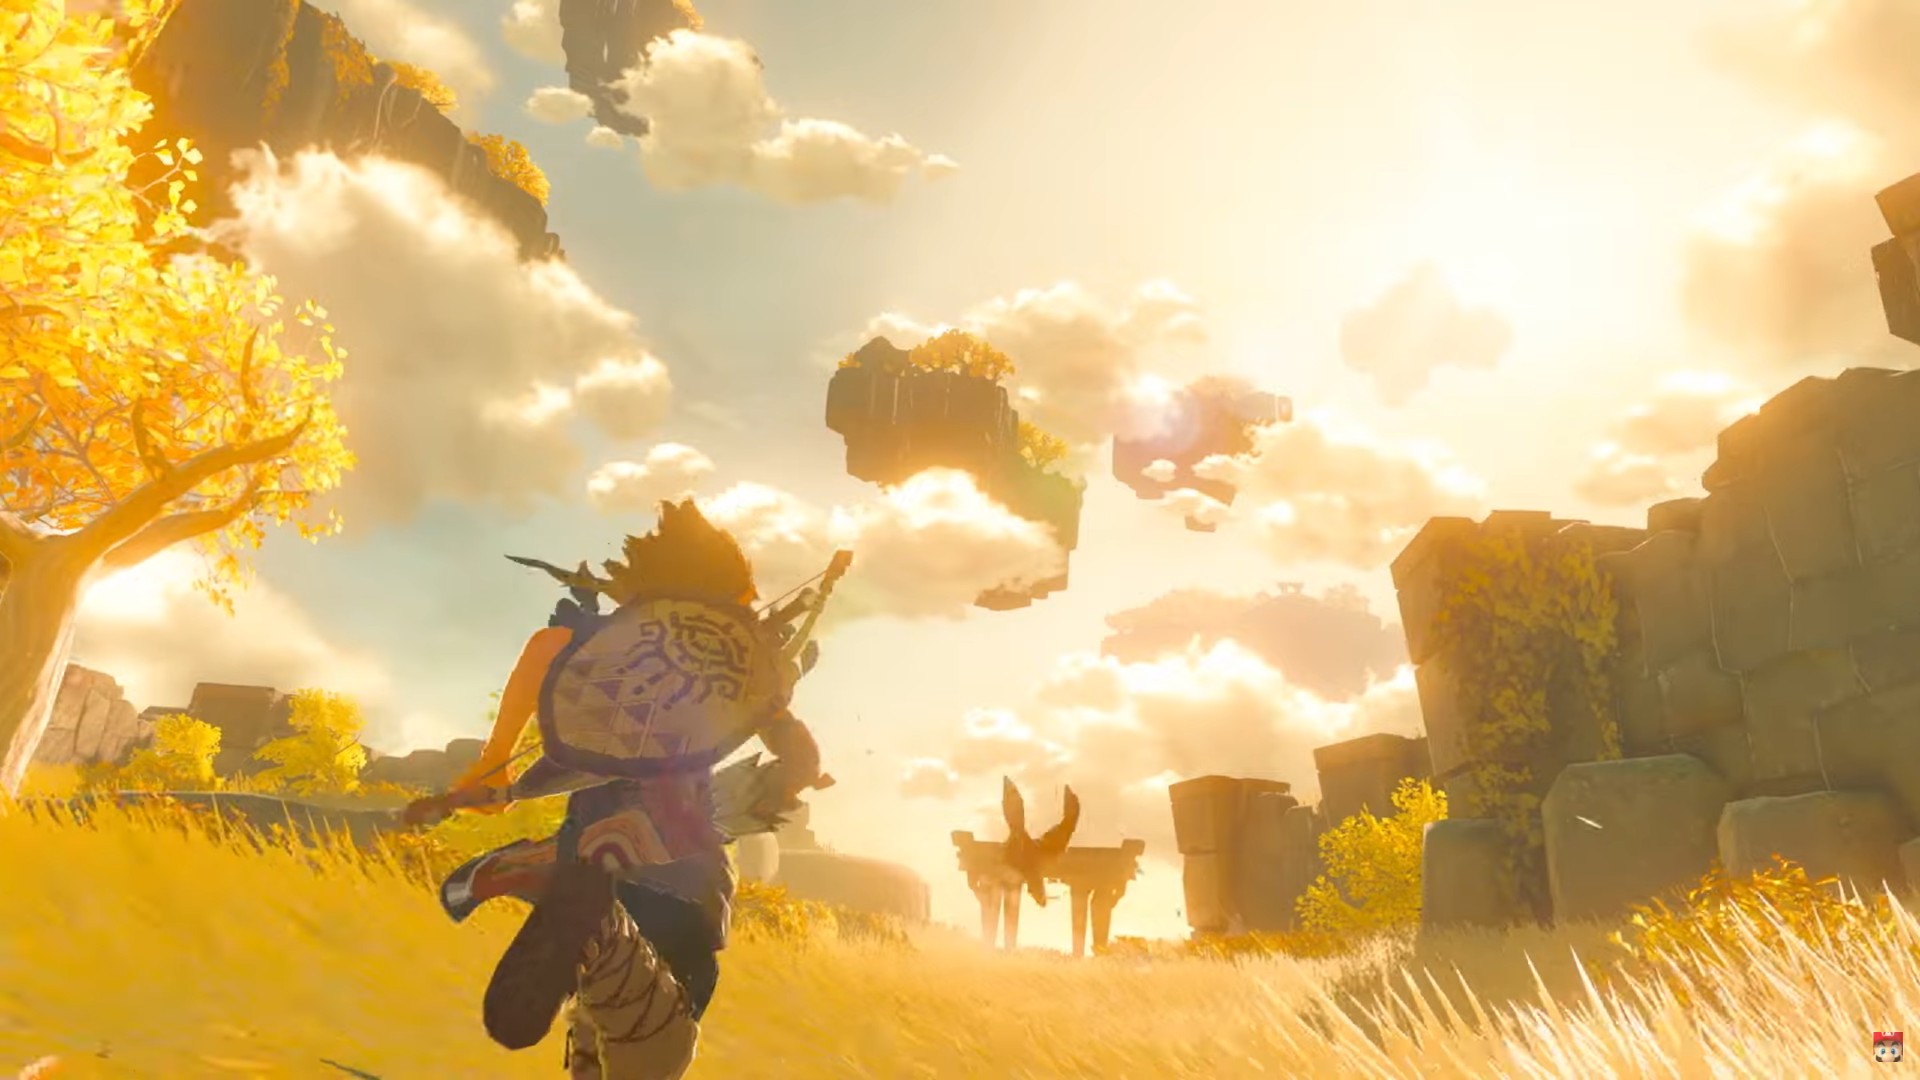 5 Reasons You Should Play 'the Legend of Zelda: Breath of the Wild